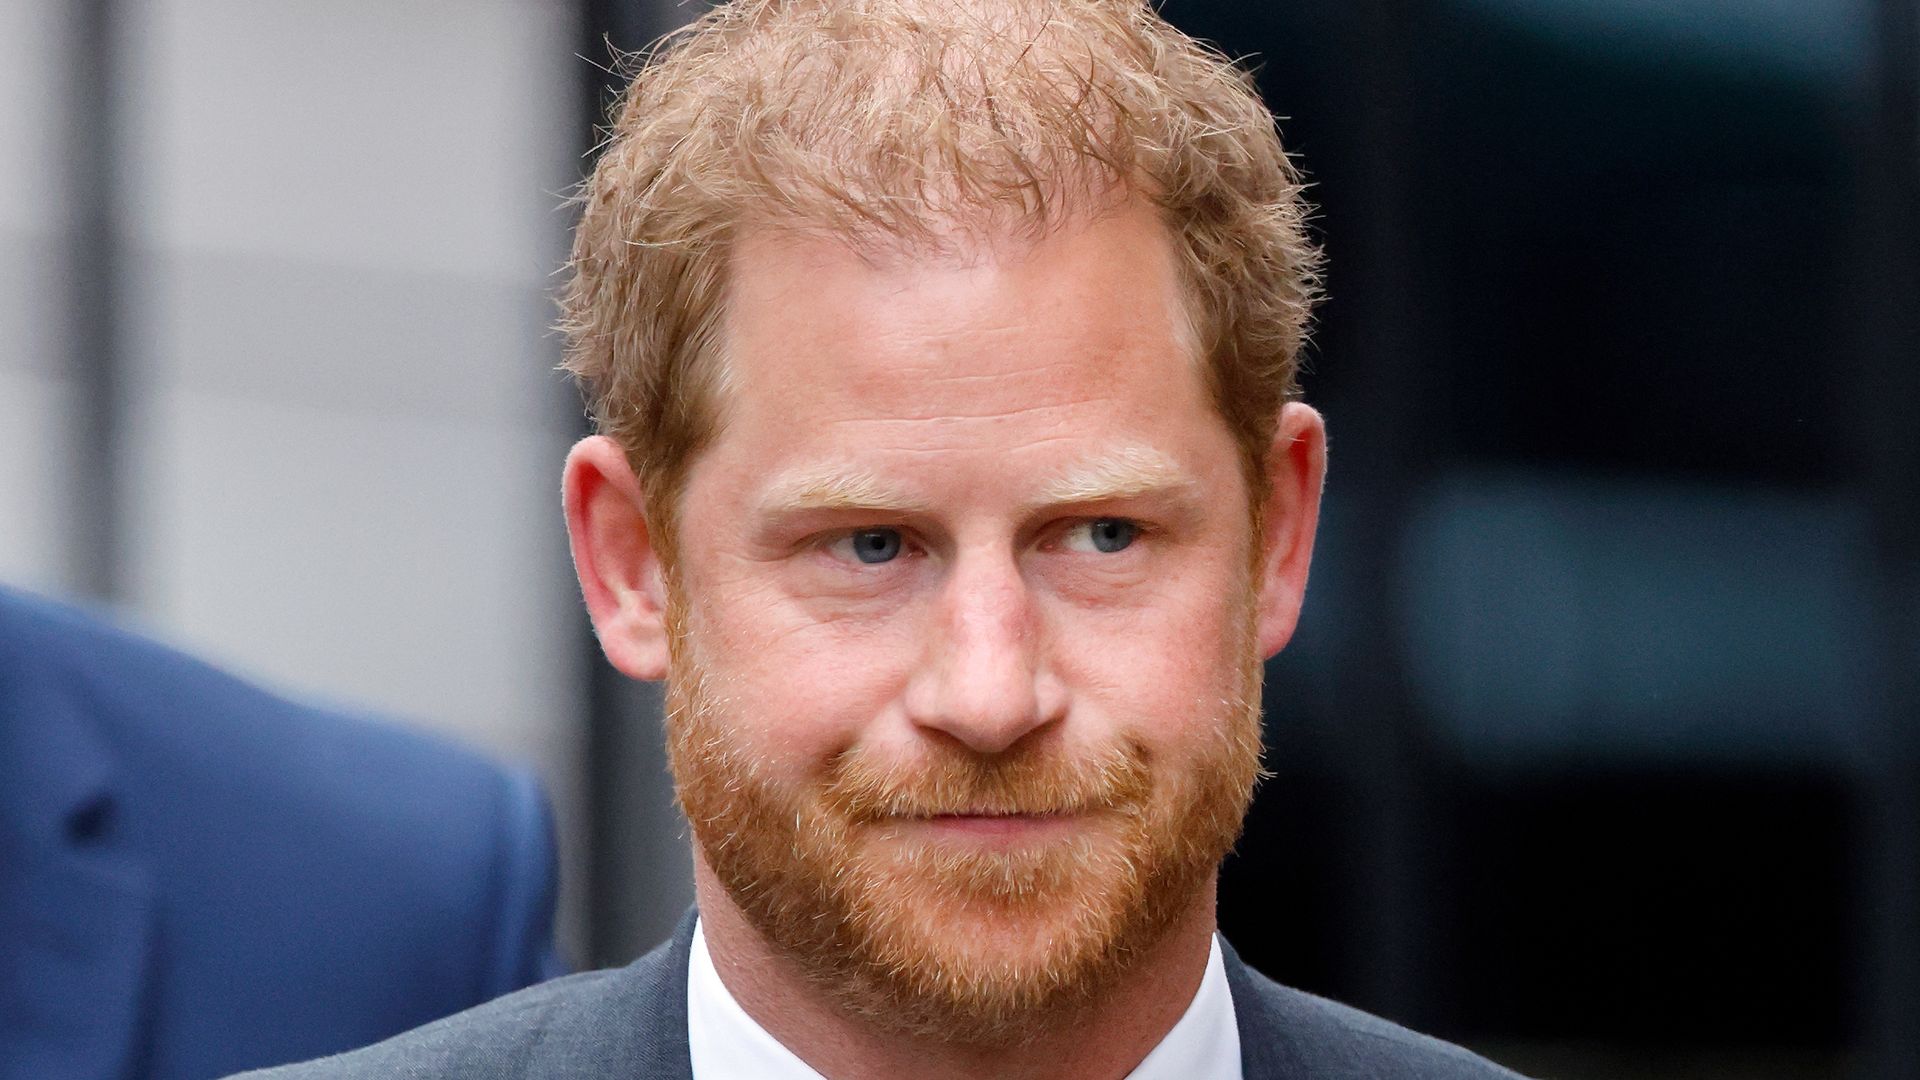 Where is Prince Harry staying during his London court case?